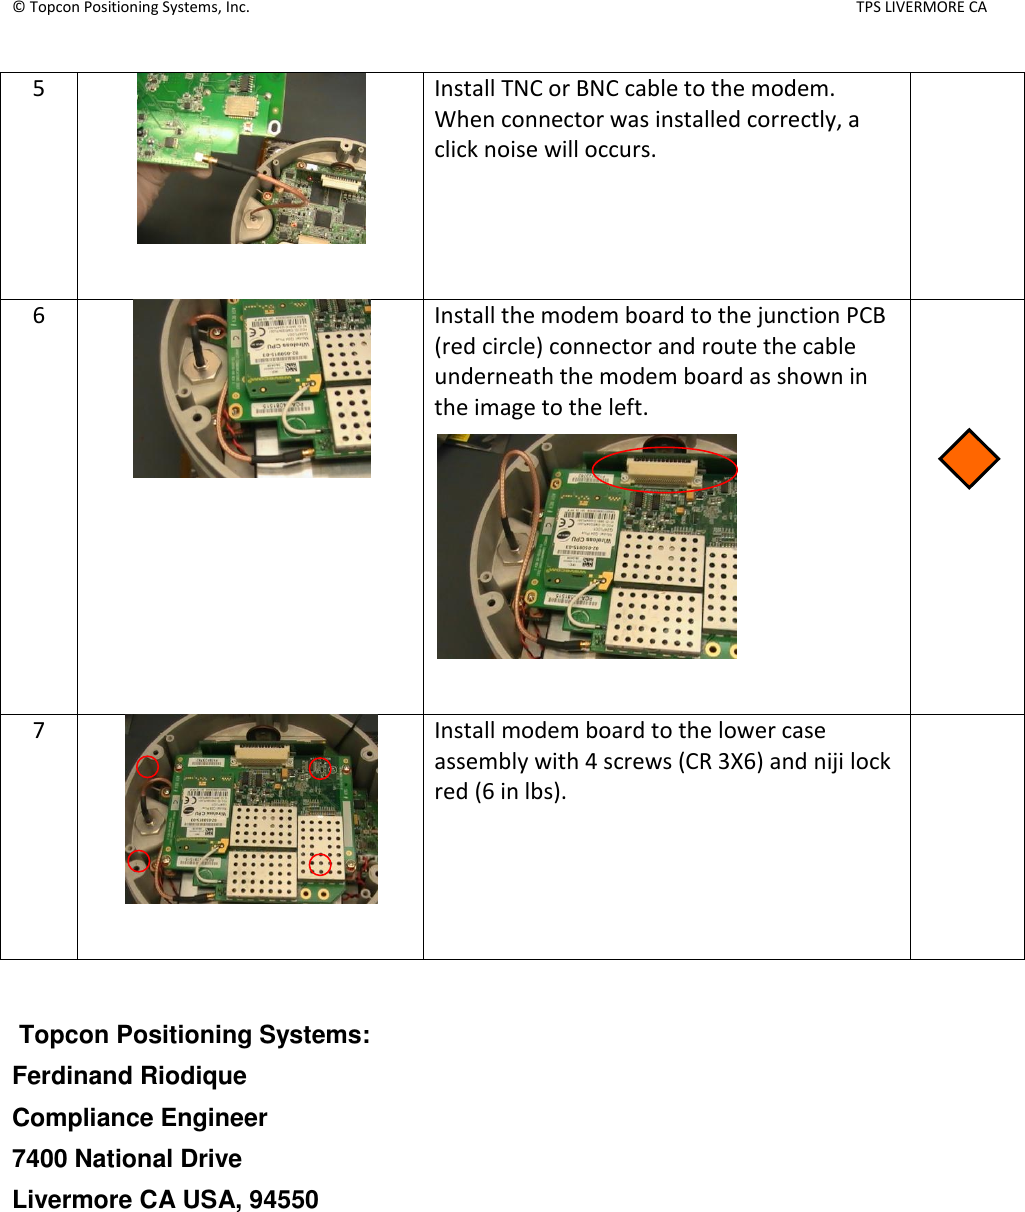 © Topcon Positioning Systems, Inc.    TPS LIVERMORE CA  5   Install TNC or BNC cable to the modem.  When connector was installed correctly, a click noise will occurs.   6   Install the modem board to the junction PCB (red circle) connector and route the cable underneath the modem board as shown in the image to the left.     7   Install modem board to the lower case assembly with 4 screws (CR 3X6) and niji lock red (6 in lbs).     Topcon Positioning Systems: Ferdinand Riodique Compliance Engineer 7400 National Drive   Livermore CA USA, 94550 